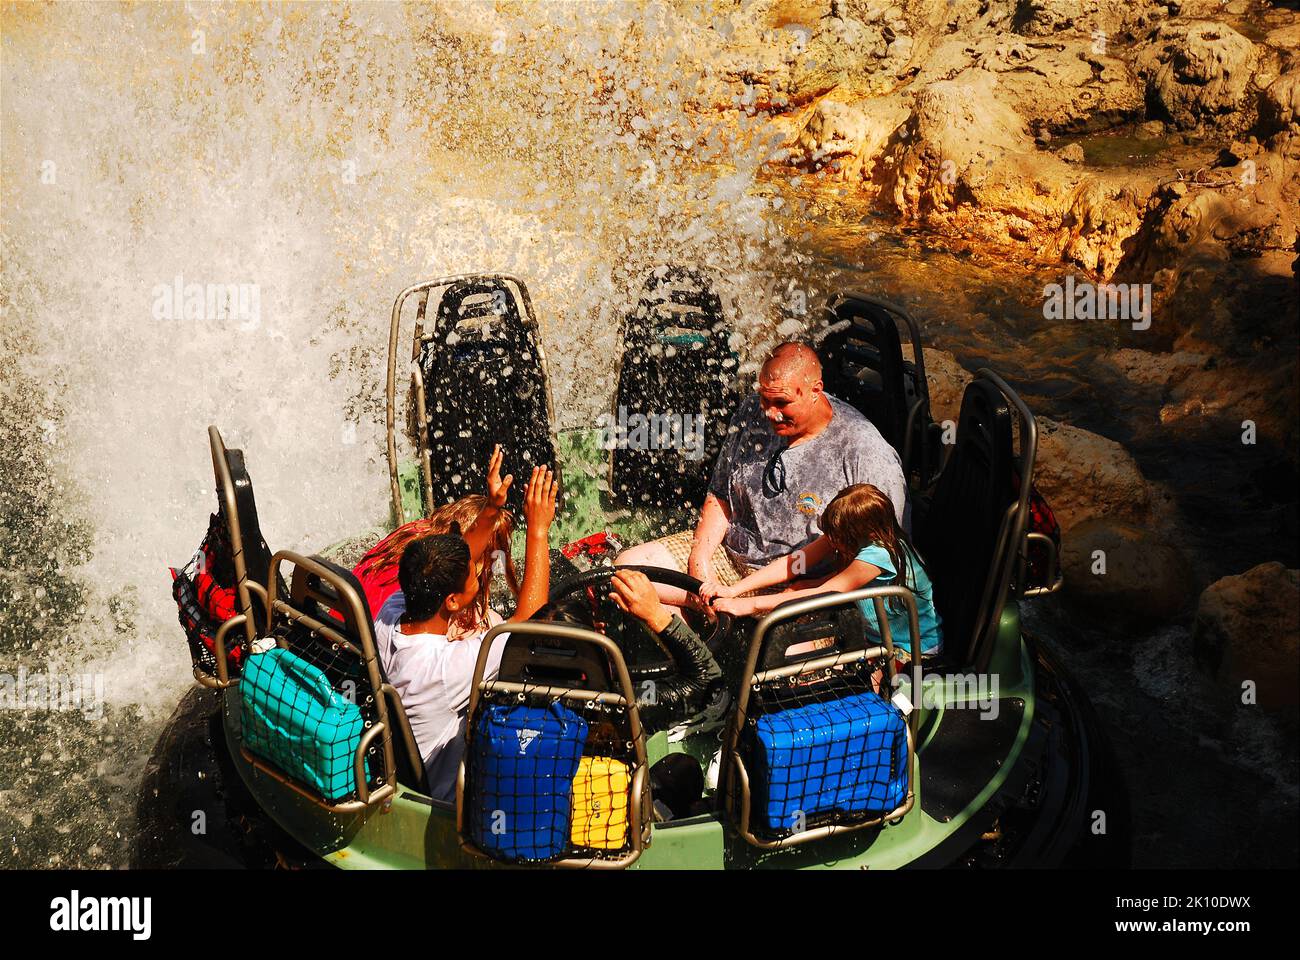 A family gets soaked and wet while riding on the Grizzly River Run, a water ride in Disneyland's California Adventure amusement park Stock Photo